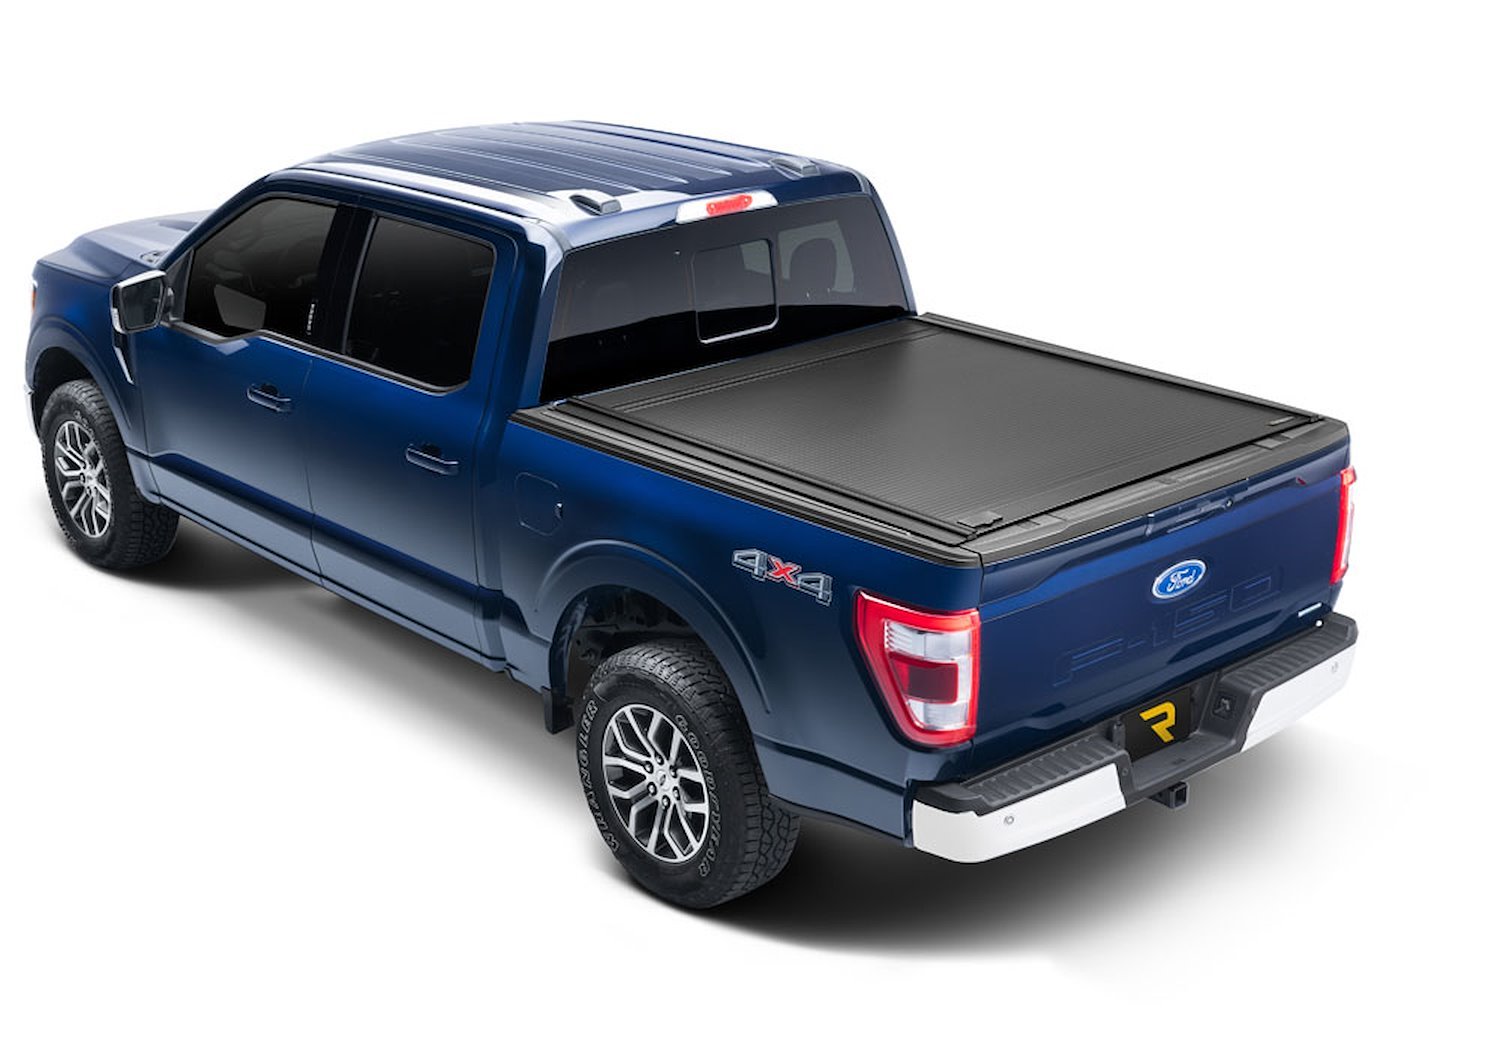 60379 RetraxOne MX Retractable Tonneau Cover Fits Select Ford F-150 6' 7" Bed without Stake Pockets